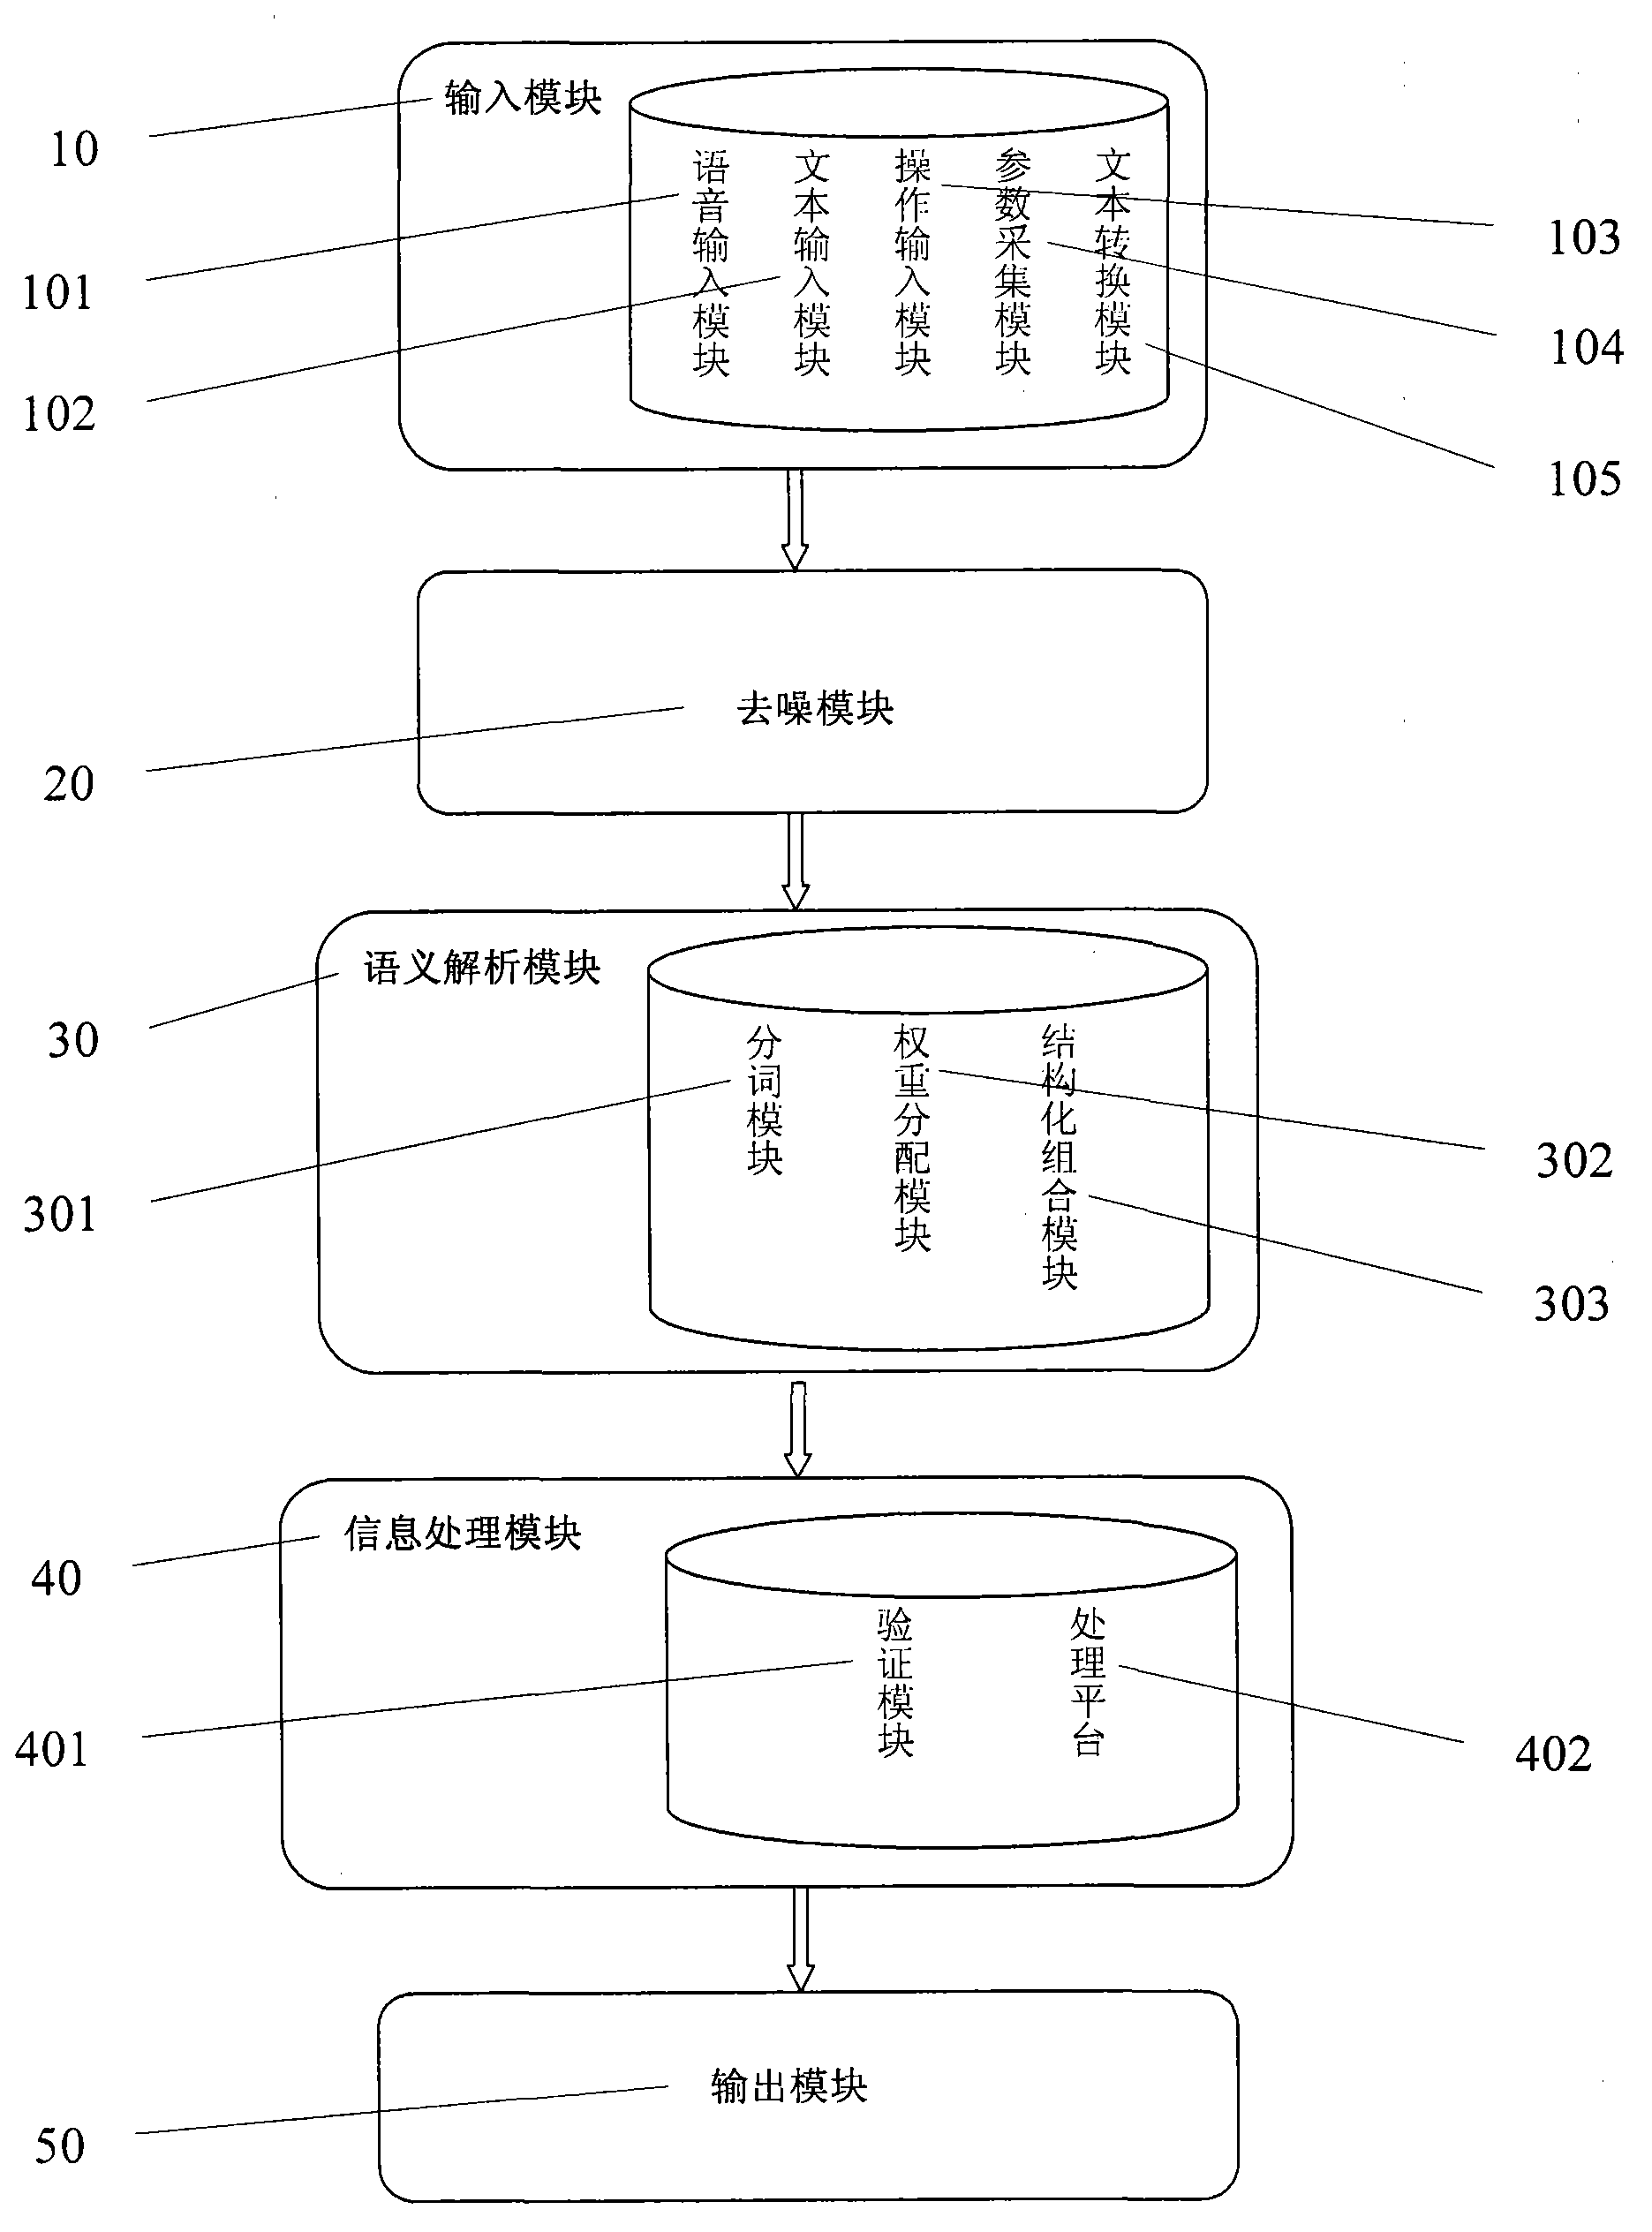 Mobile terminal based smart question answering interaction system and method